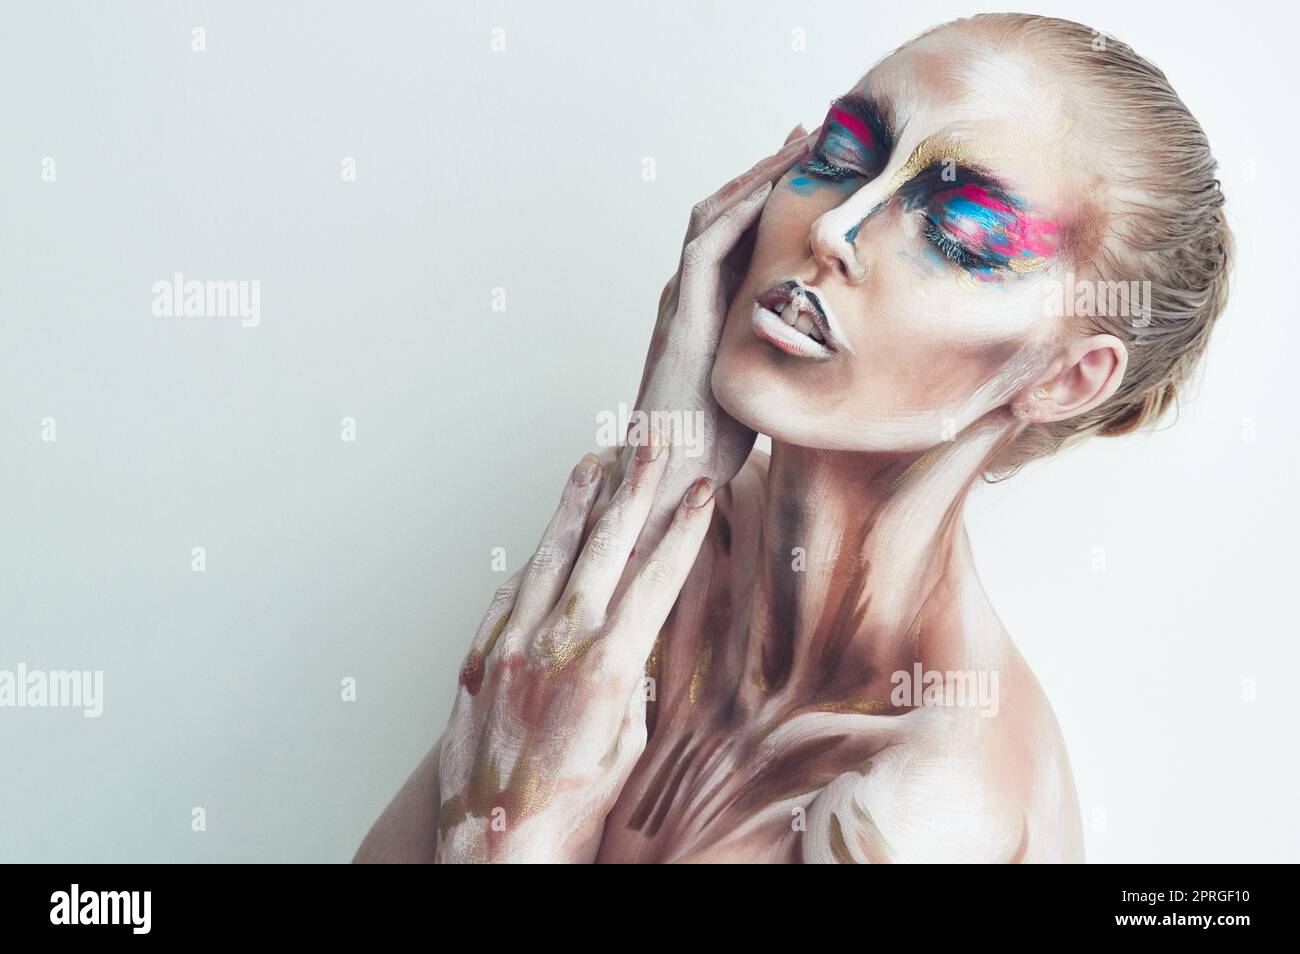 In full colour. Studio shot of a young woman posing with paint on her face. Stock Photo